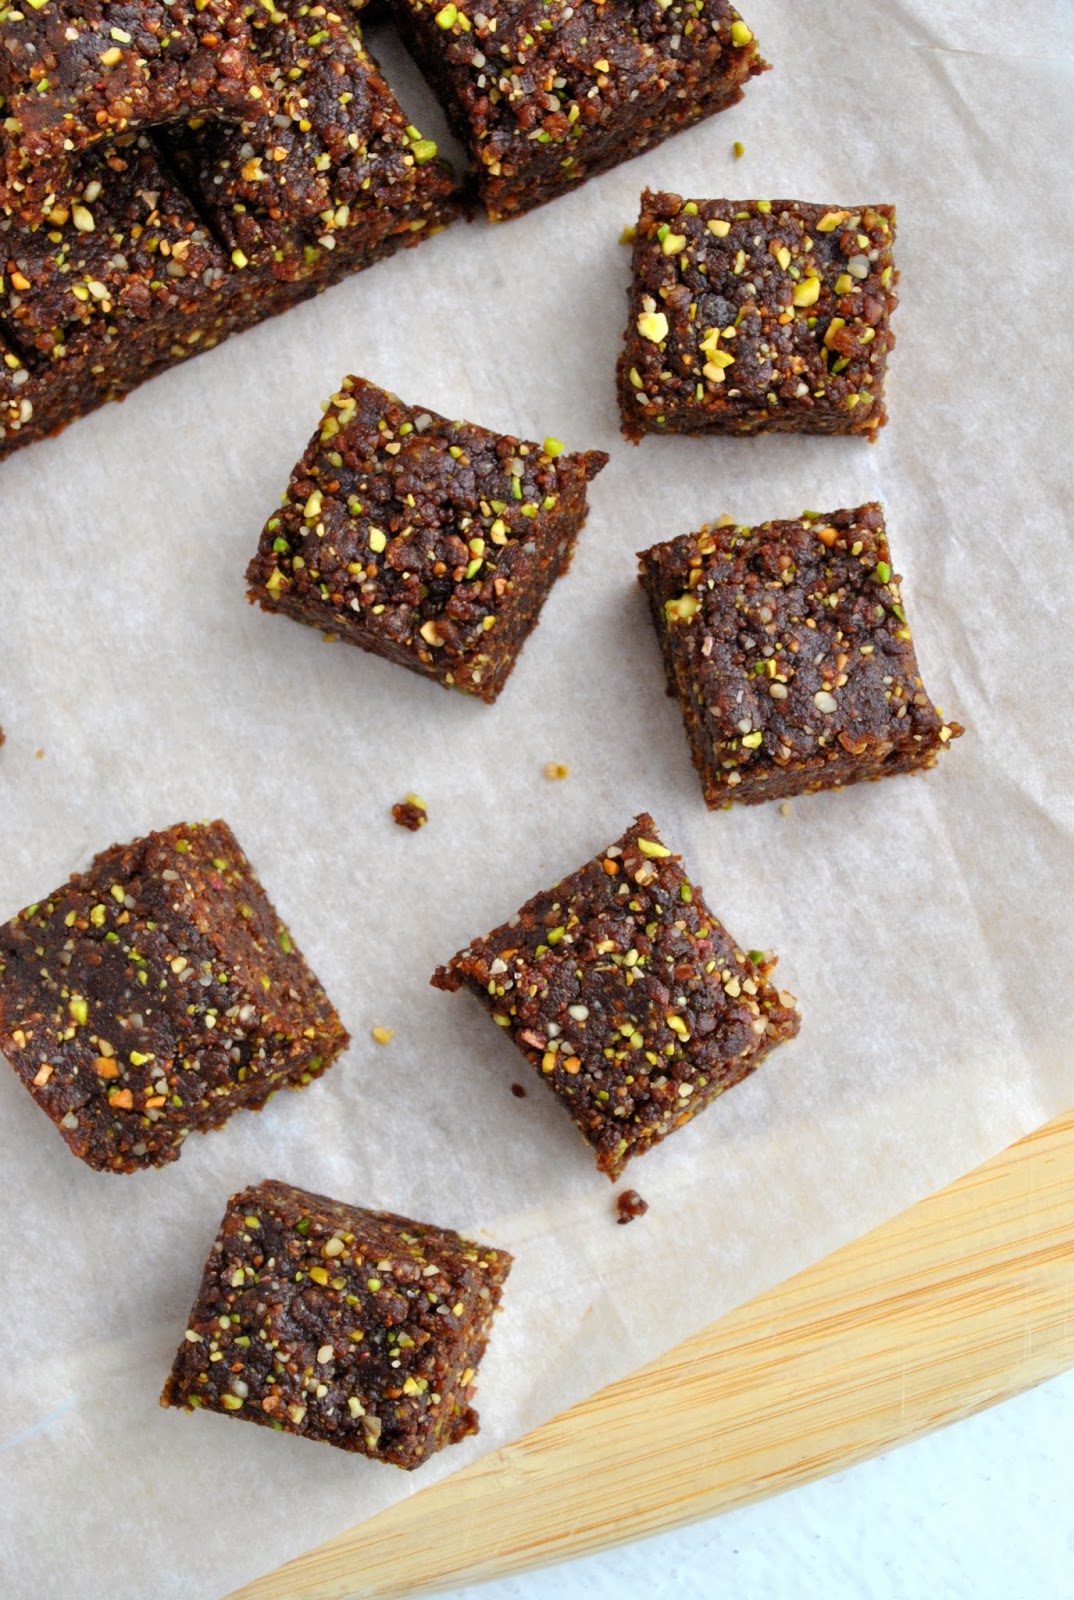 Baking Powders: Raw brownies and a giveaway